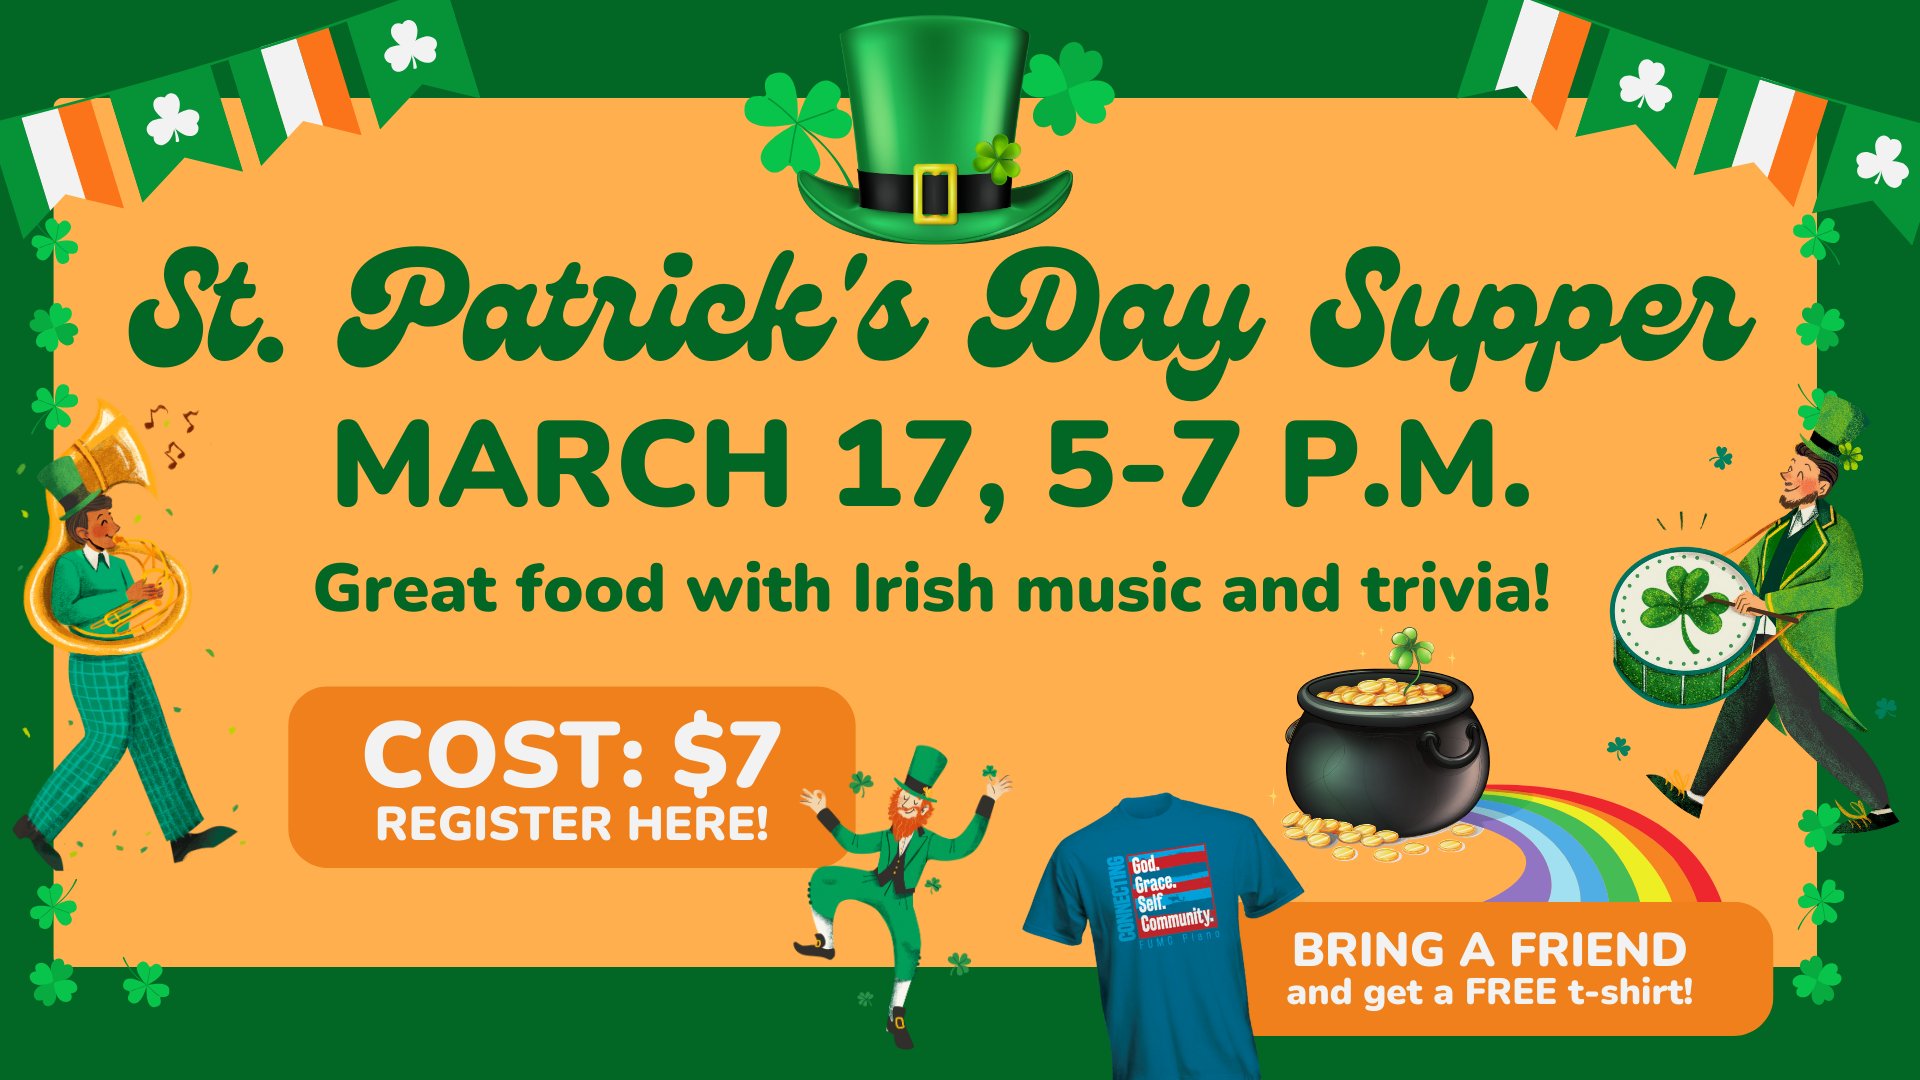 St Patrick's Day Supper FUMC